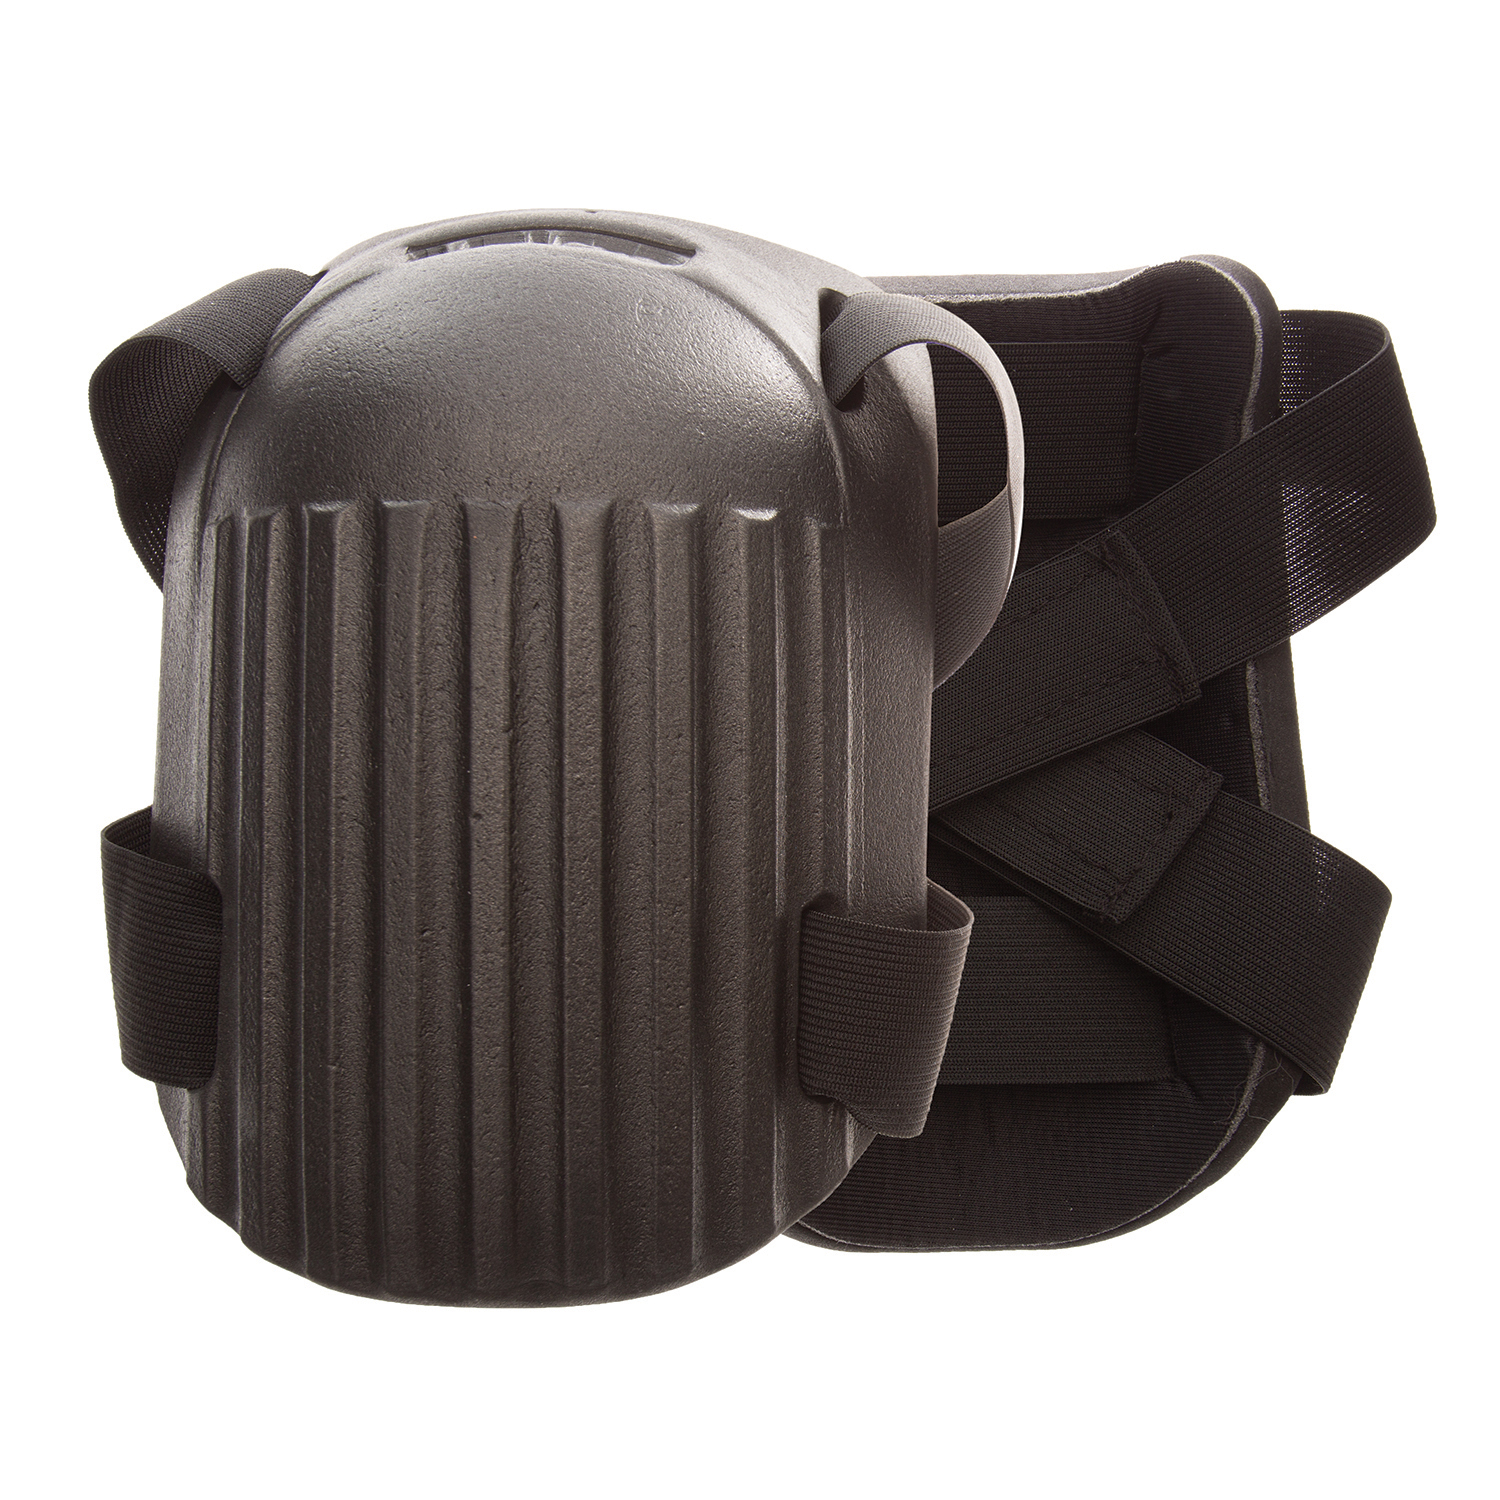 IMPACTO 845-00 KNEE PAD ULTIMATE MOLDED WING